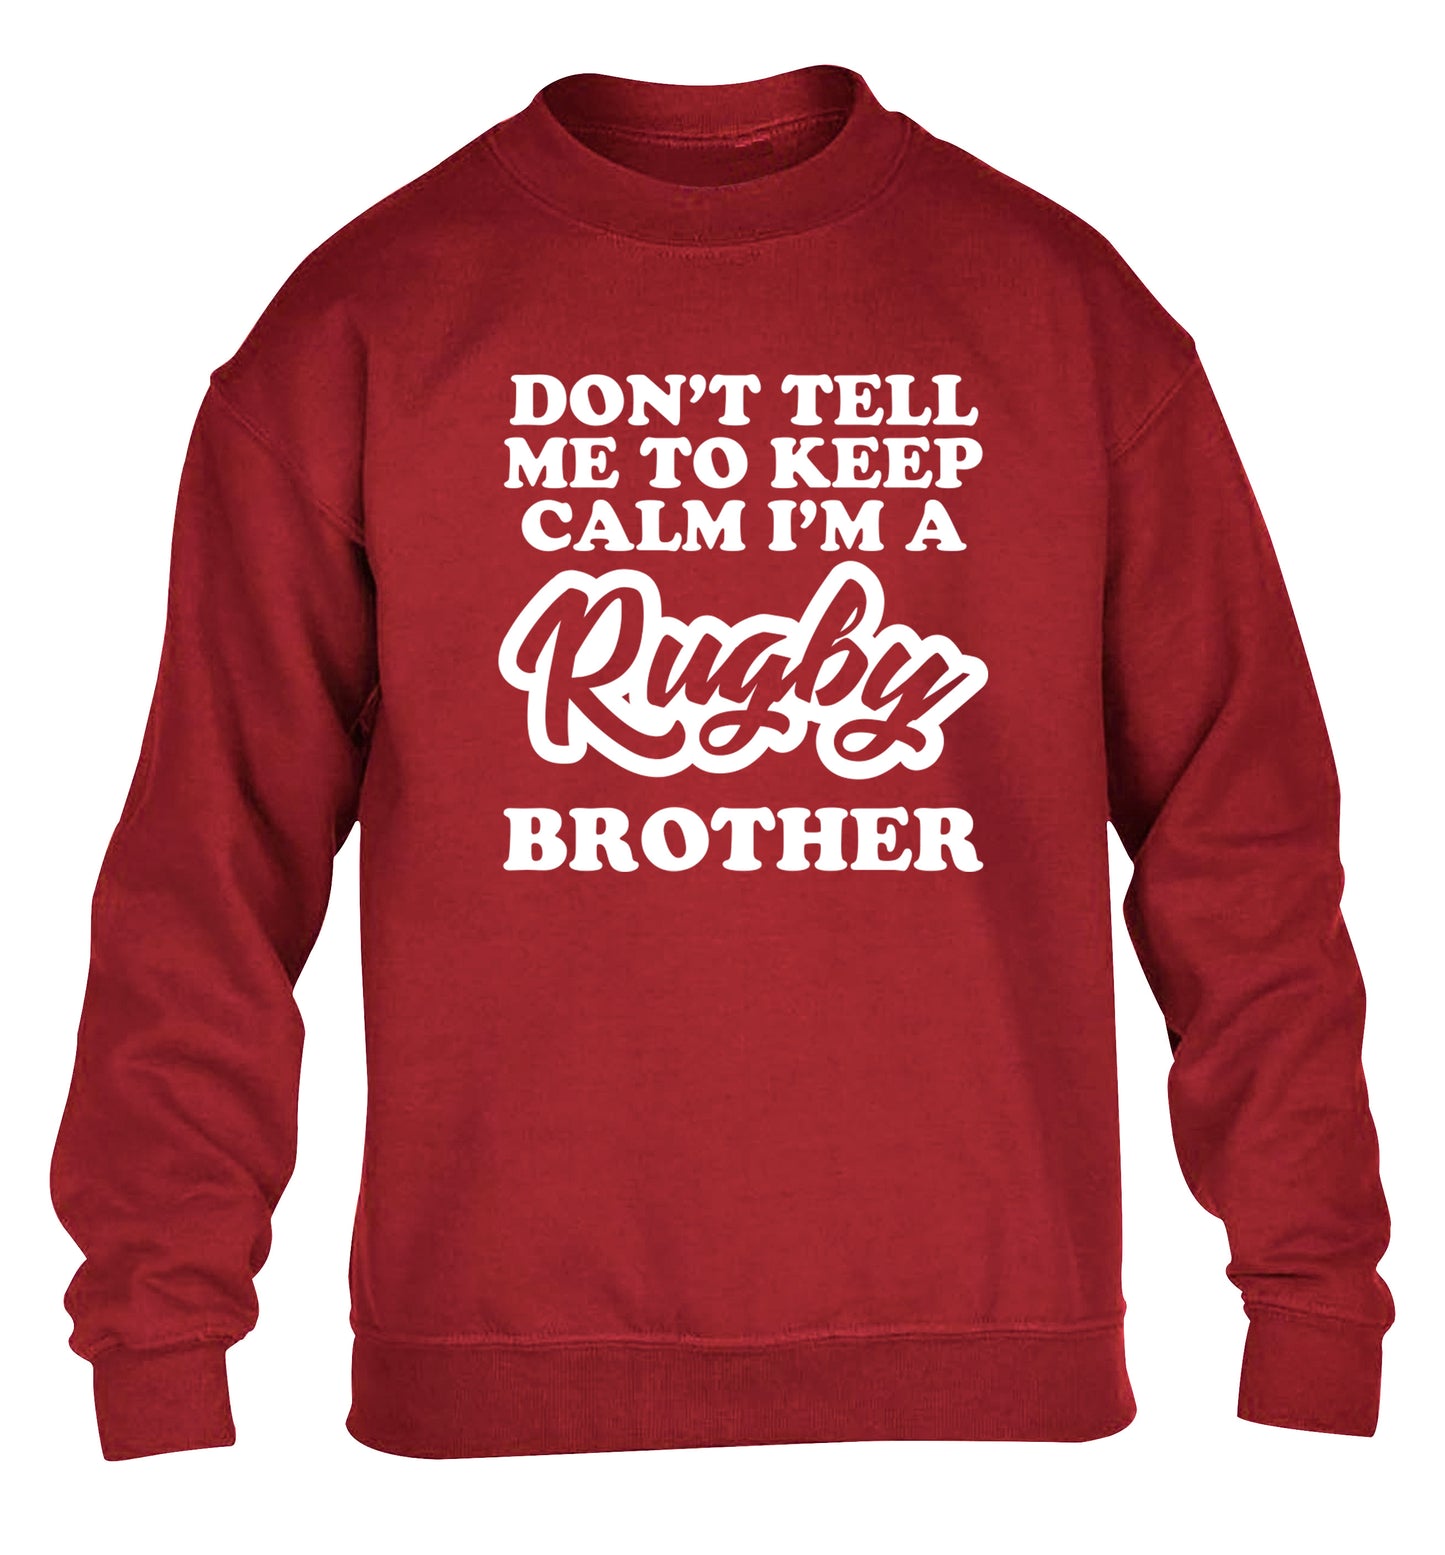 Don't tell me keep calm I'm a rugby brother children's grey sweater 12-13 Years